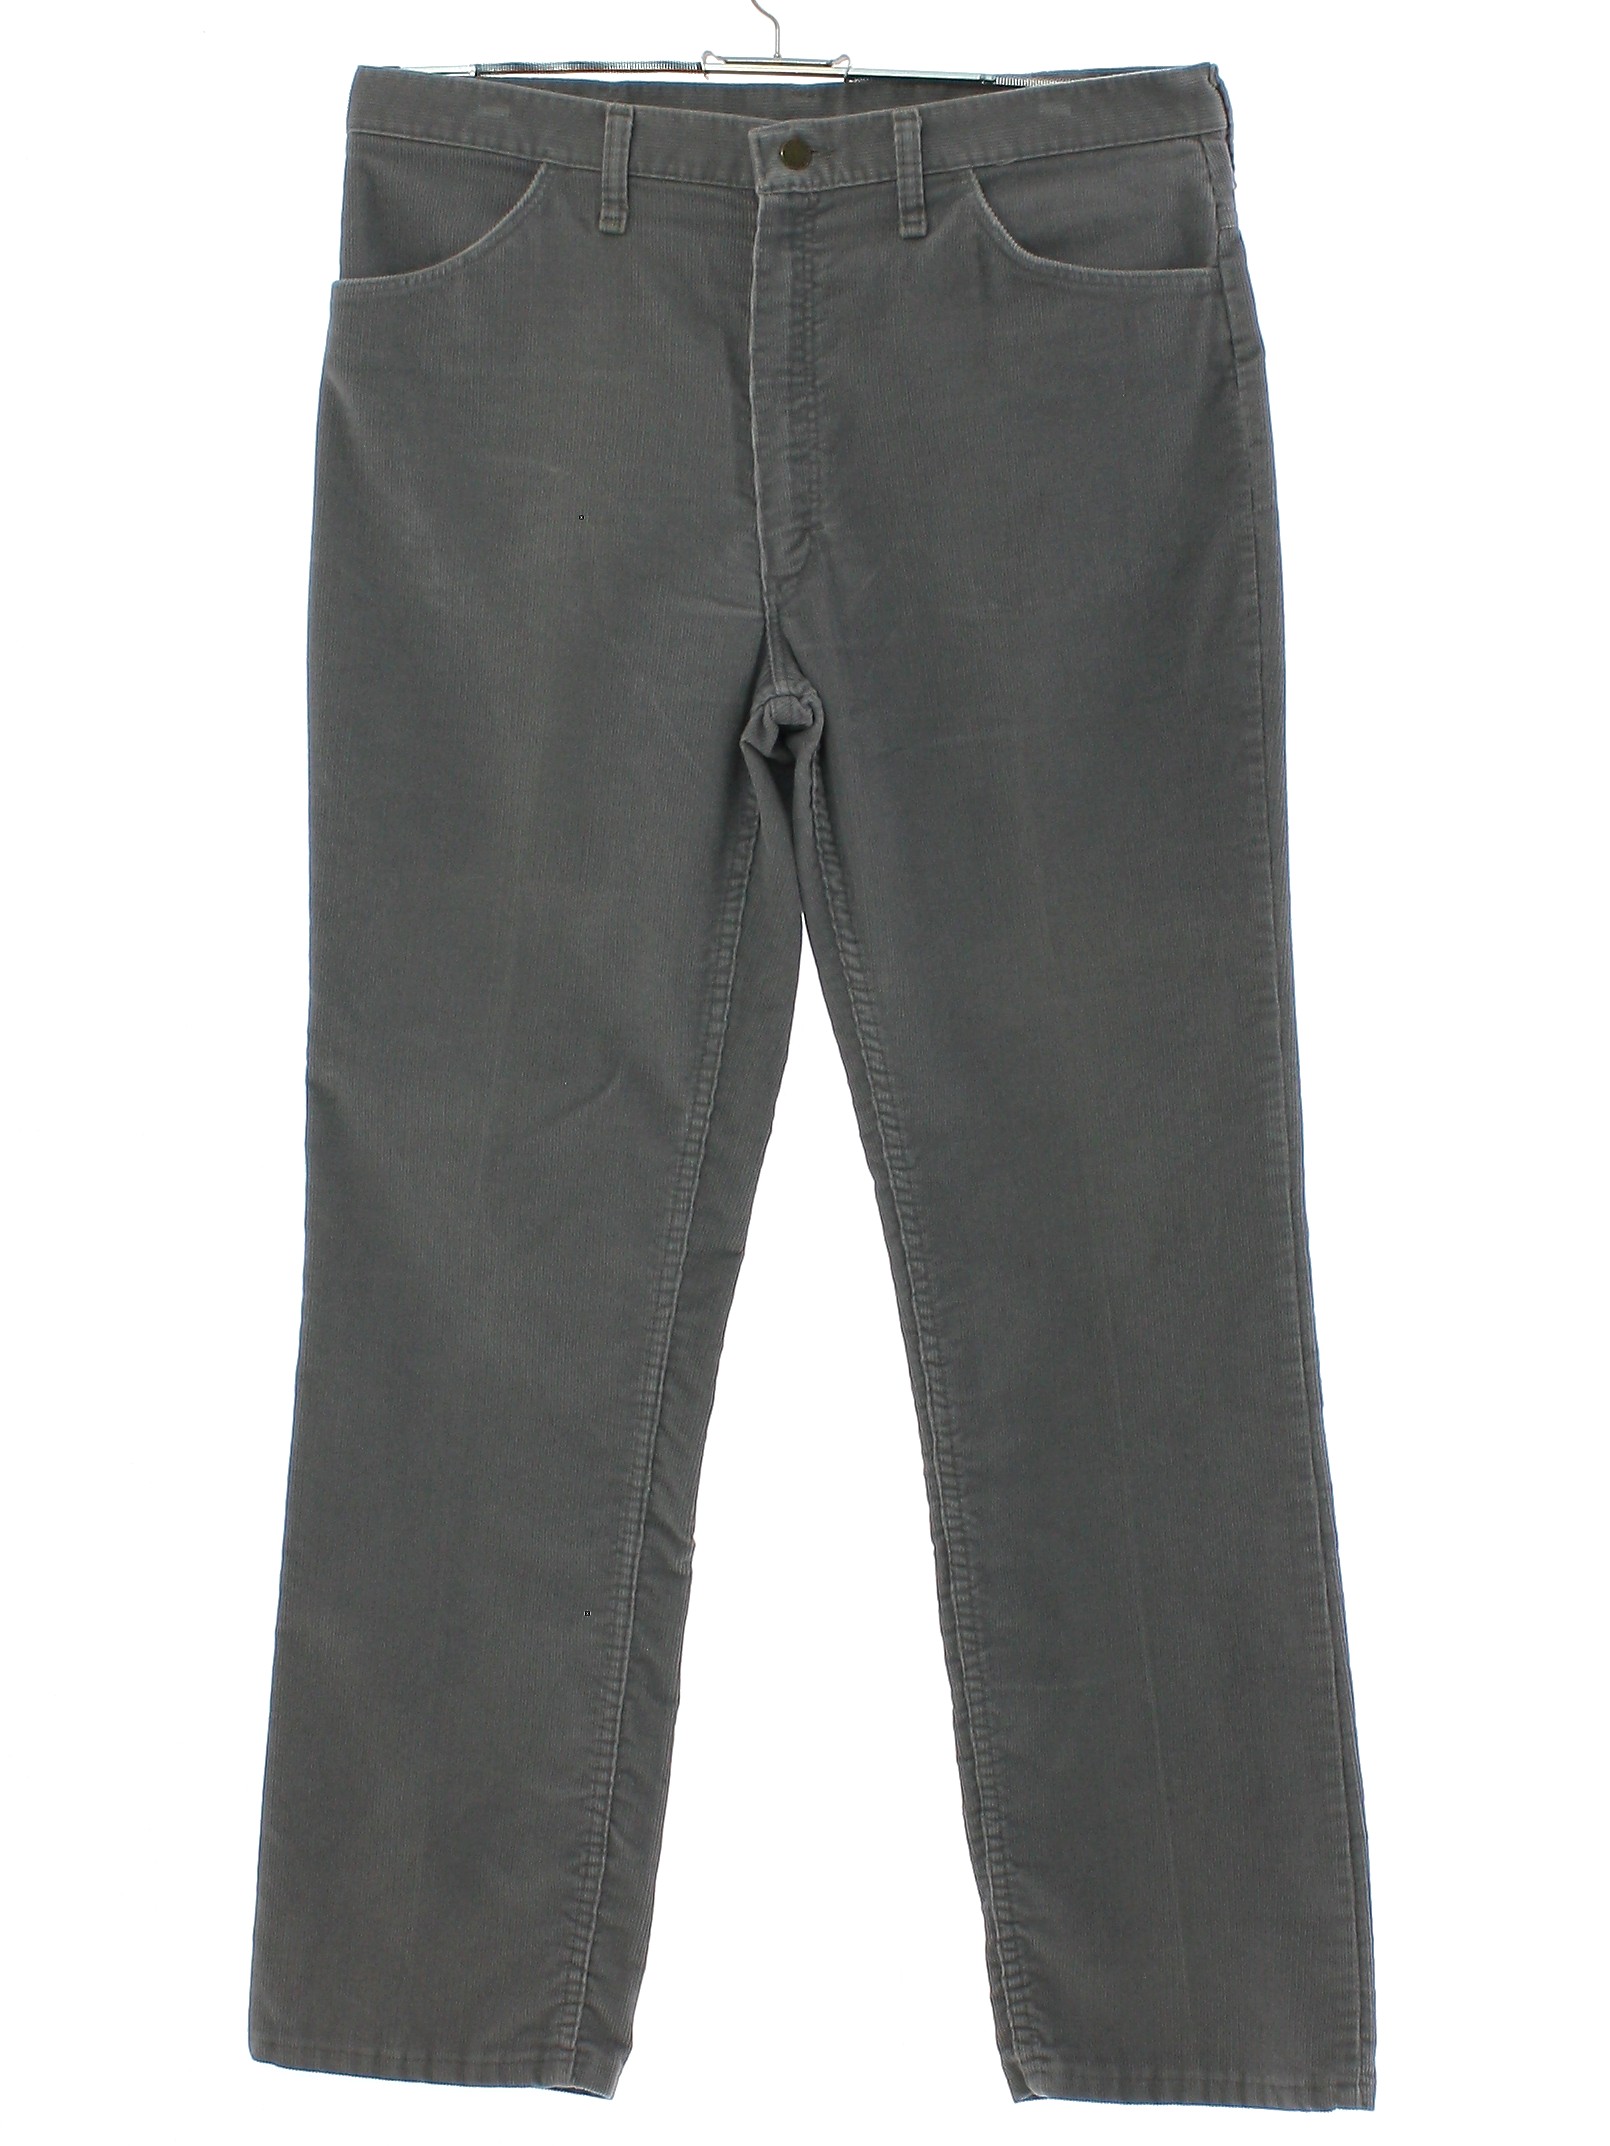 80s Pants (Rustler): Early 80s -Rustler- Mens gray solid colored cotton ...